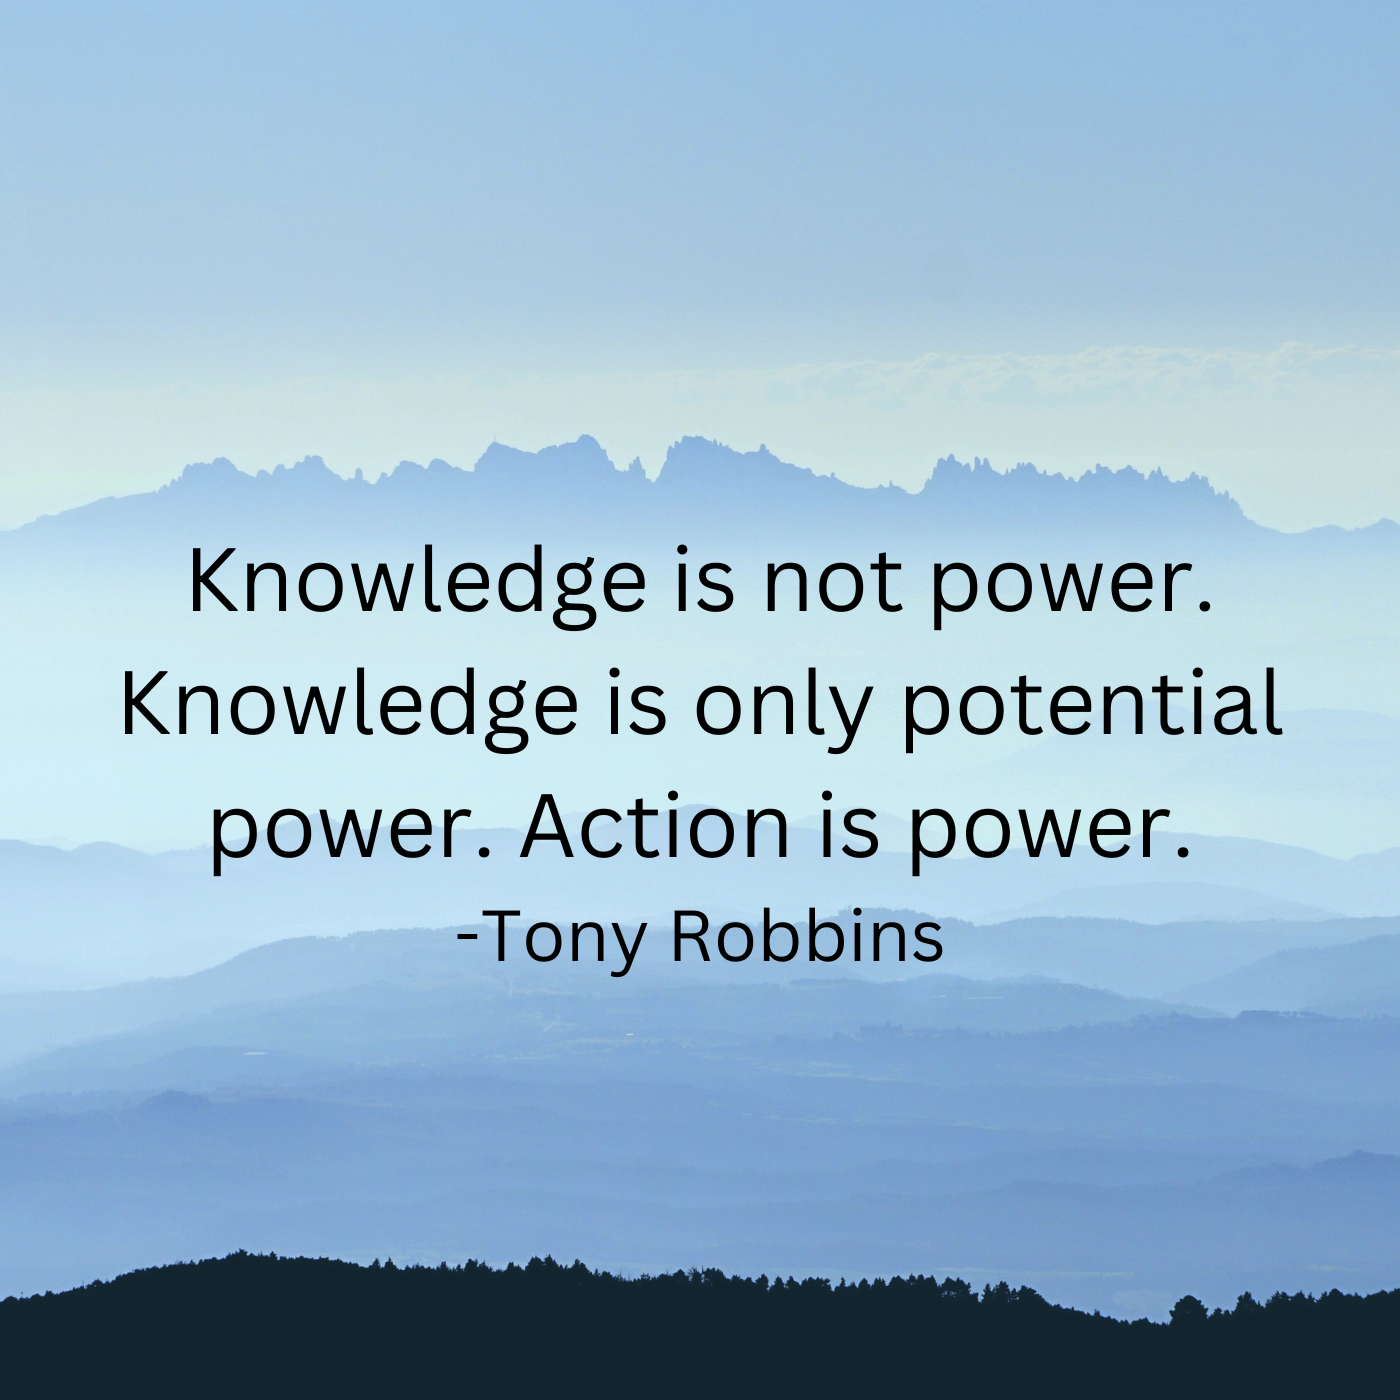 In the background are mountains in blue and it is written as a quote from Tony Robbins in the foreground: Knowlege is not power. Knowledge is only potential power. Action is power.